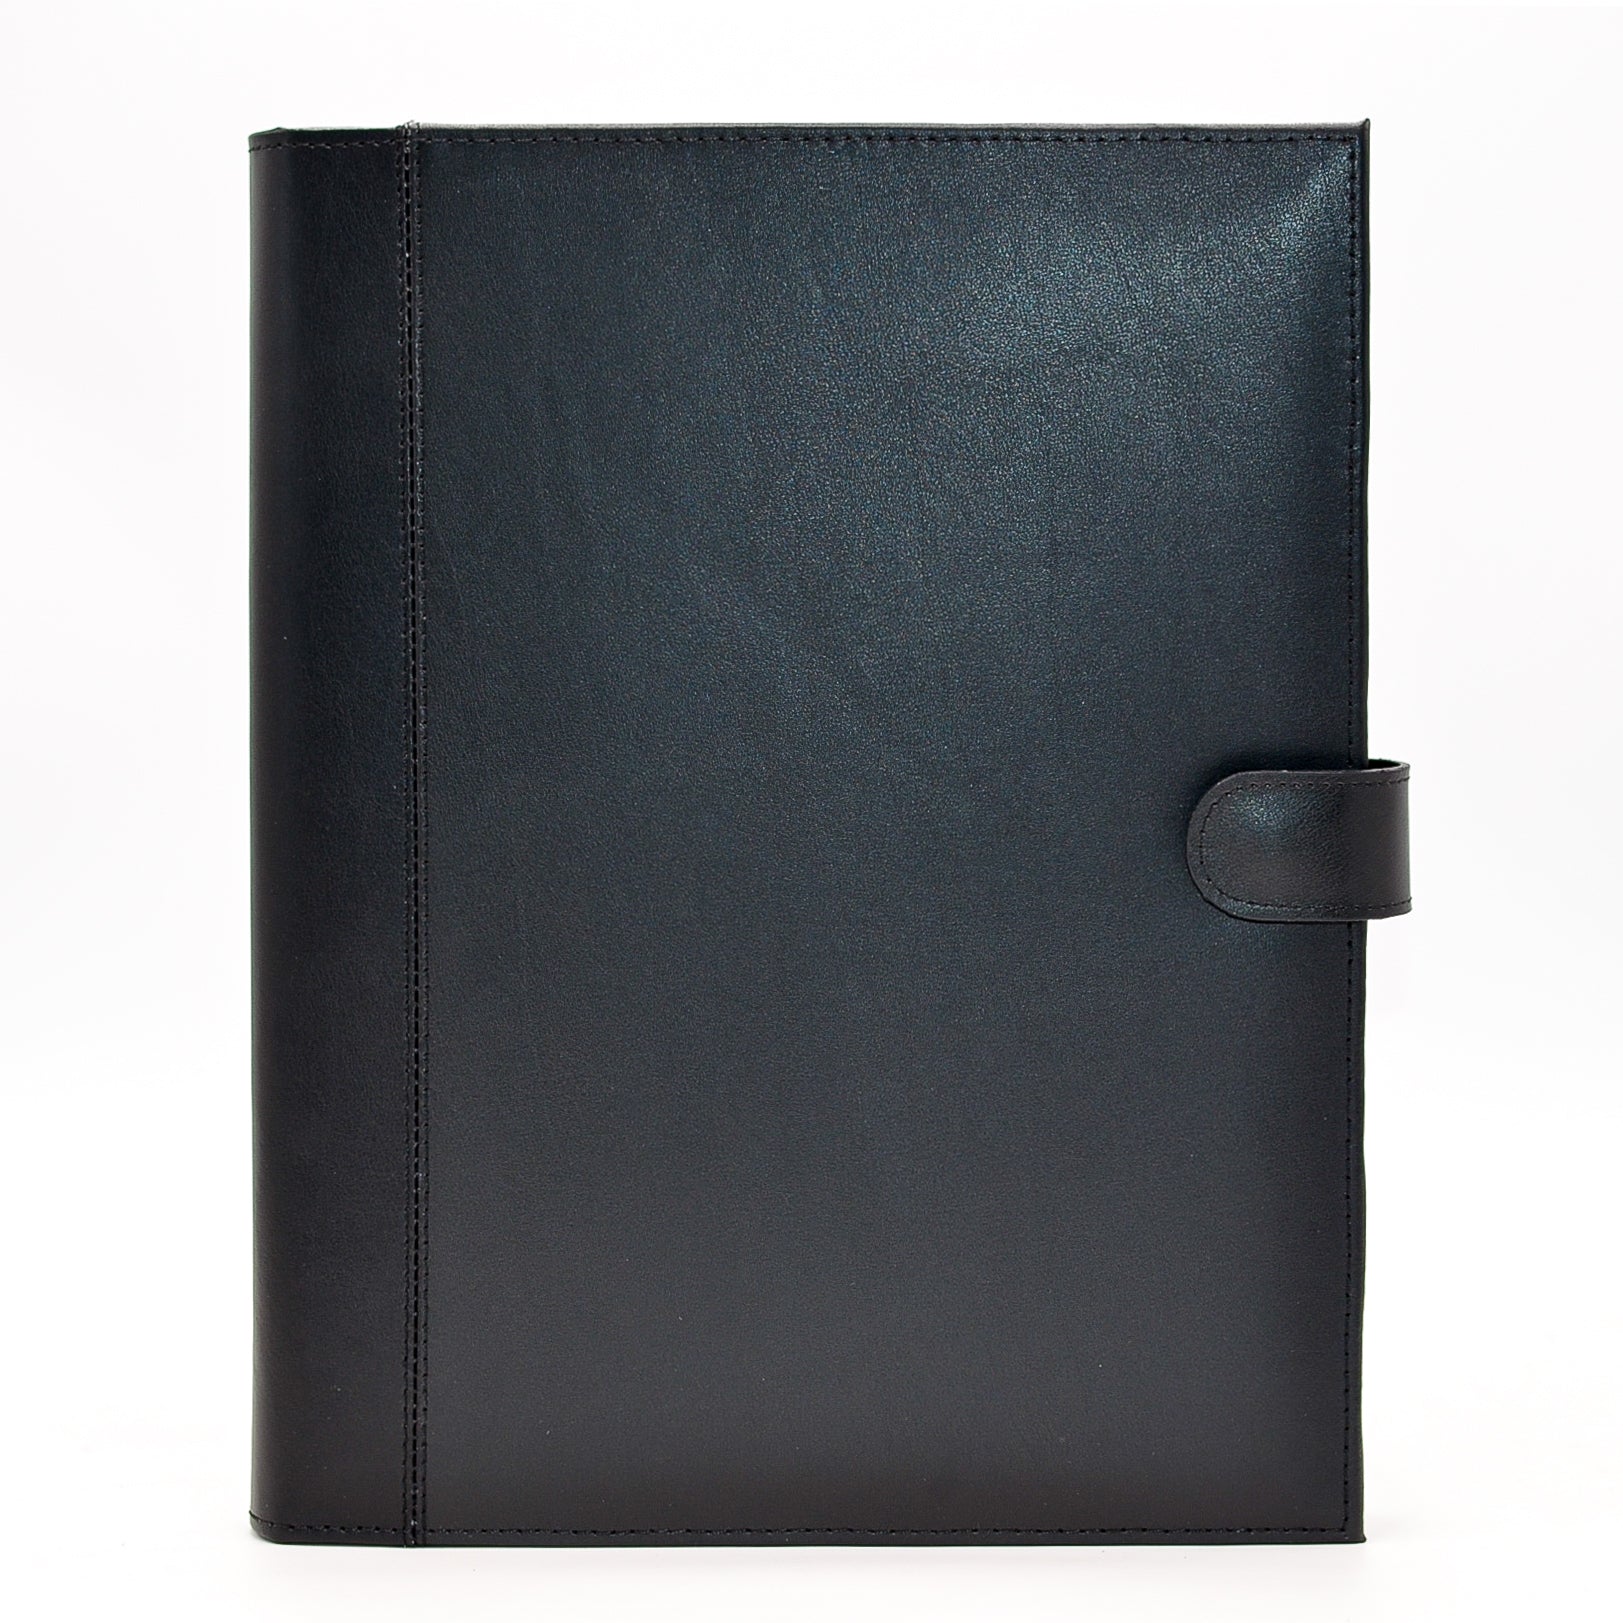 Leather 8-1/2 by x 11 inch Padfolio organizer cover document holder snap closer business card holders note pad memo pads ruled lined paper